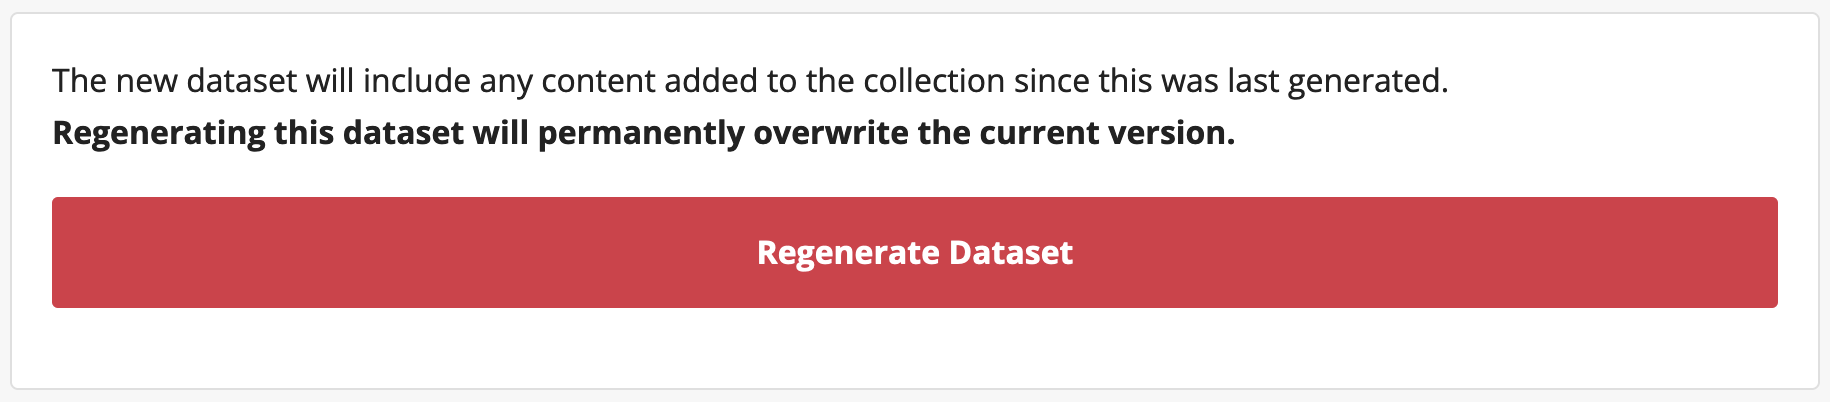 ARCH-Datasets_Regenerate.png